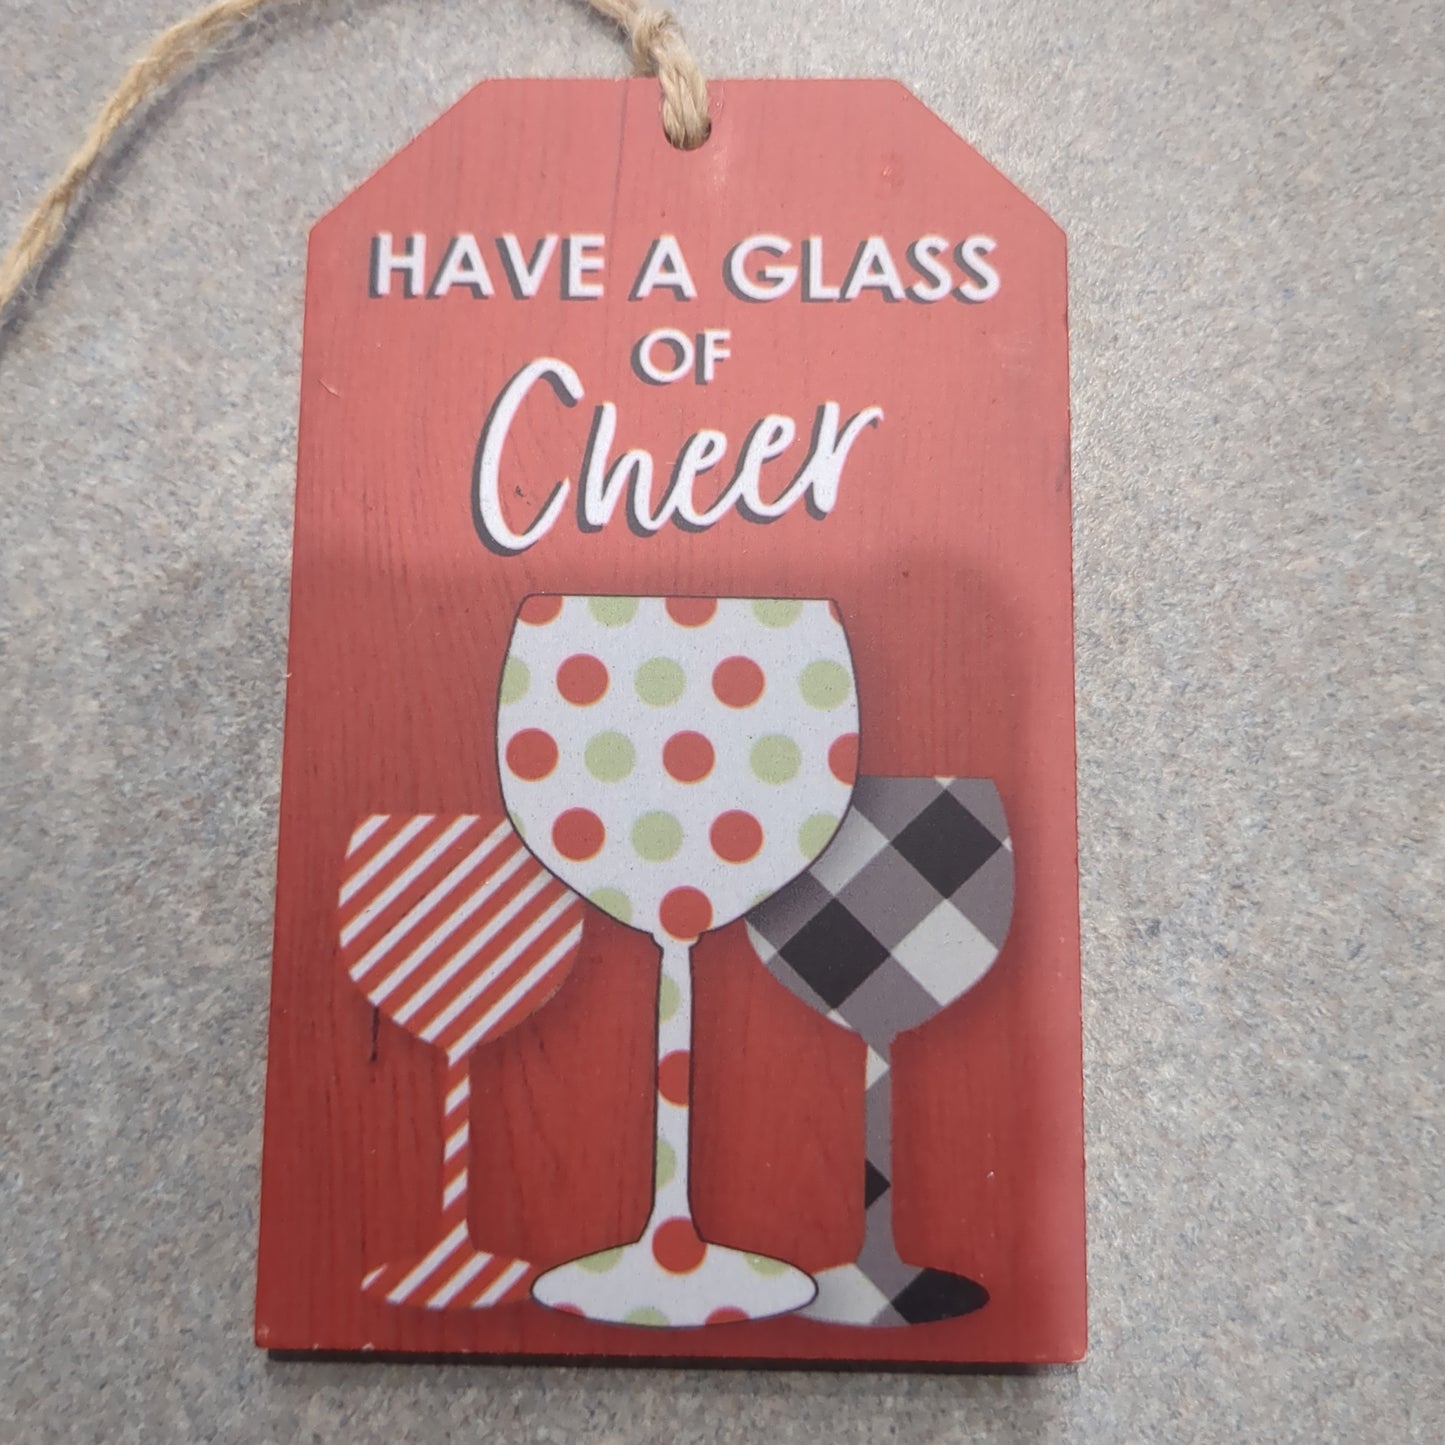 Tag ornaments have a glass of cheer